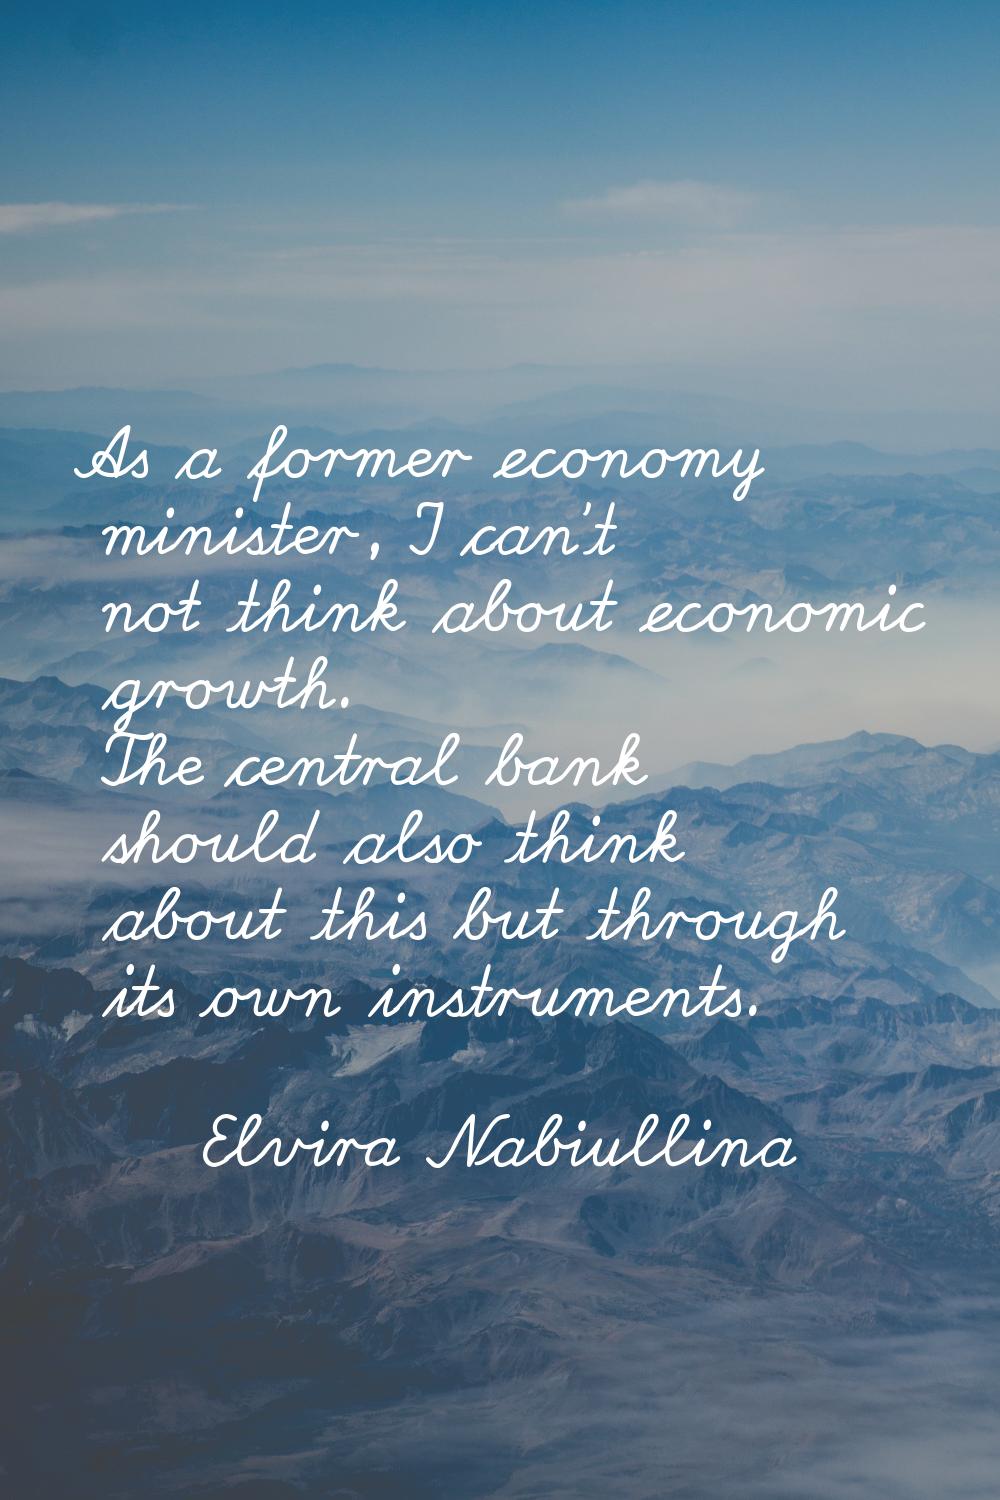 As a former economy minister, I can't not think about economic growth. The central bank should also